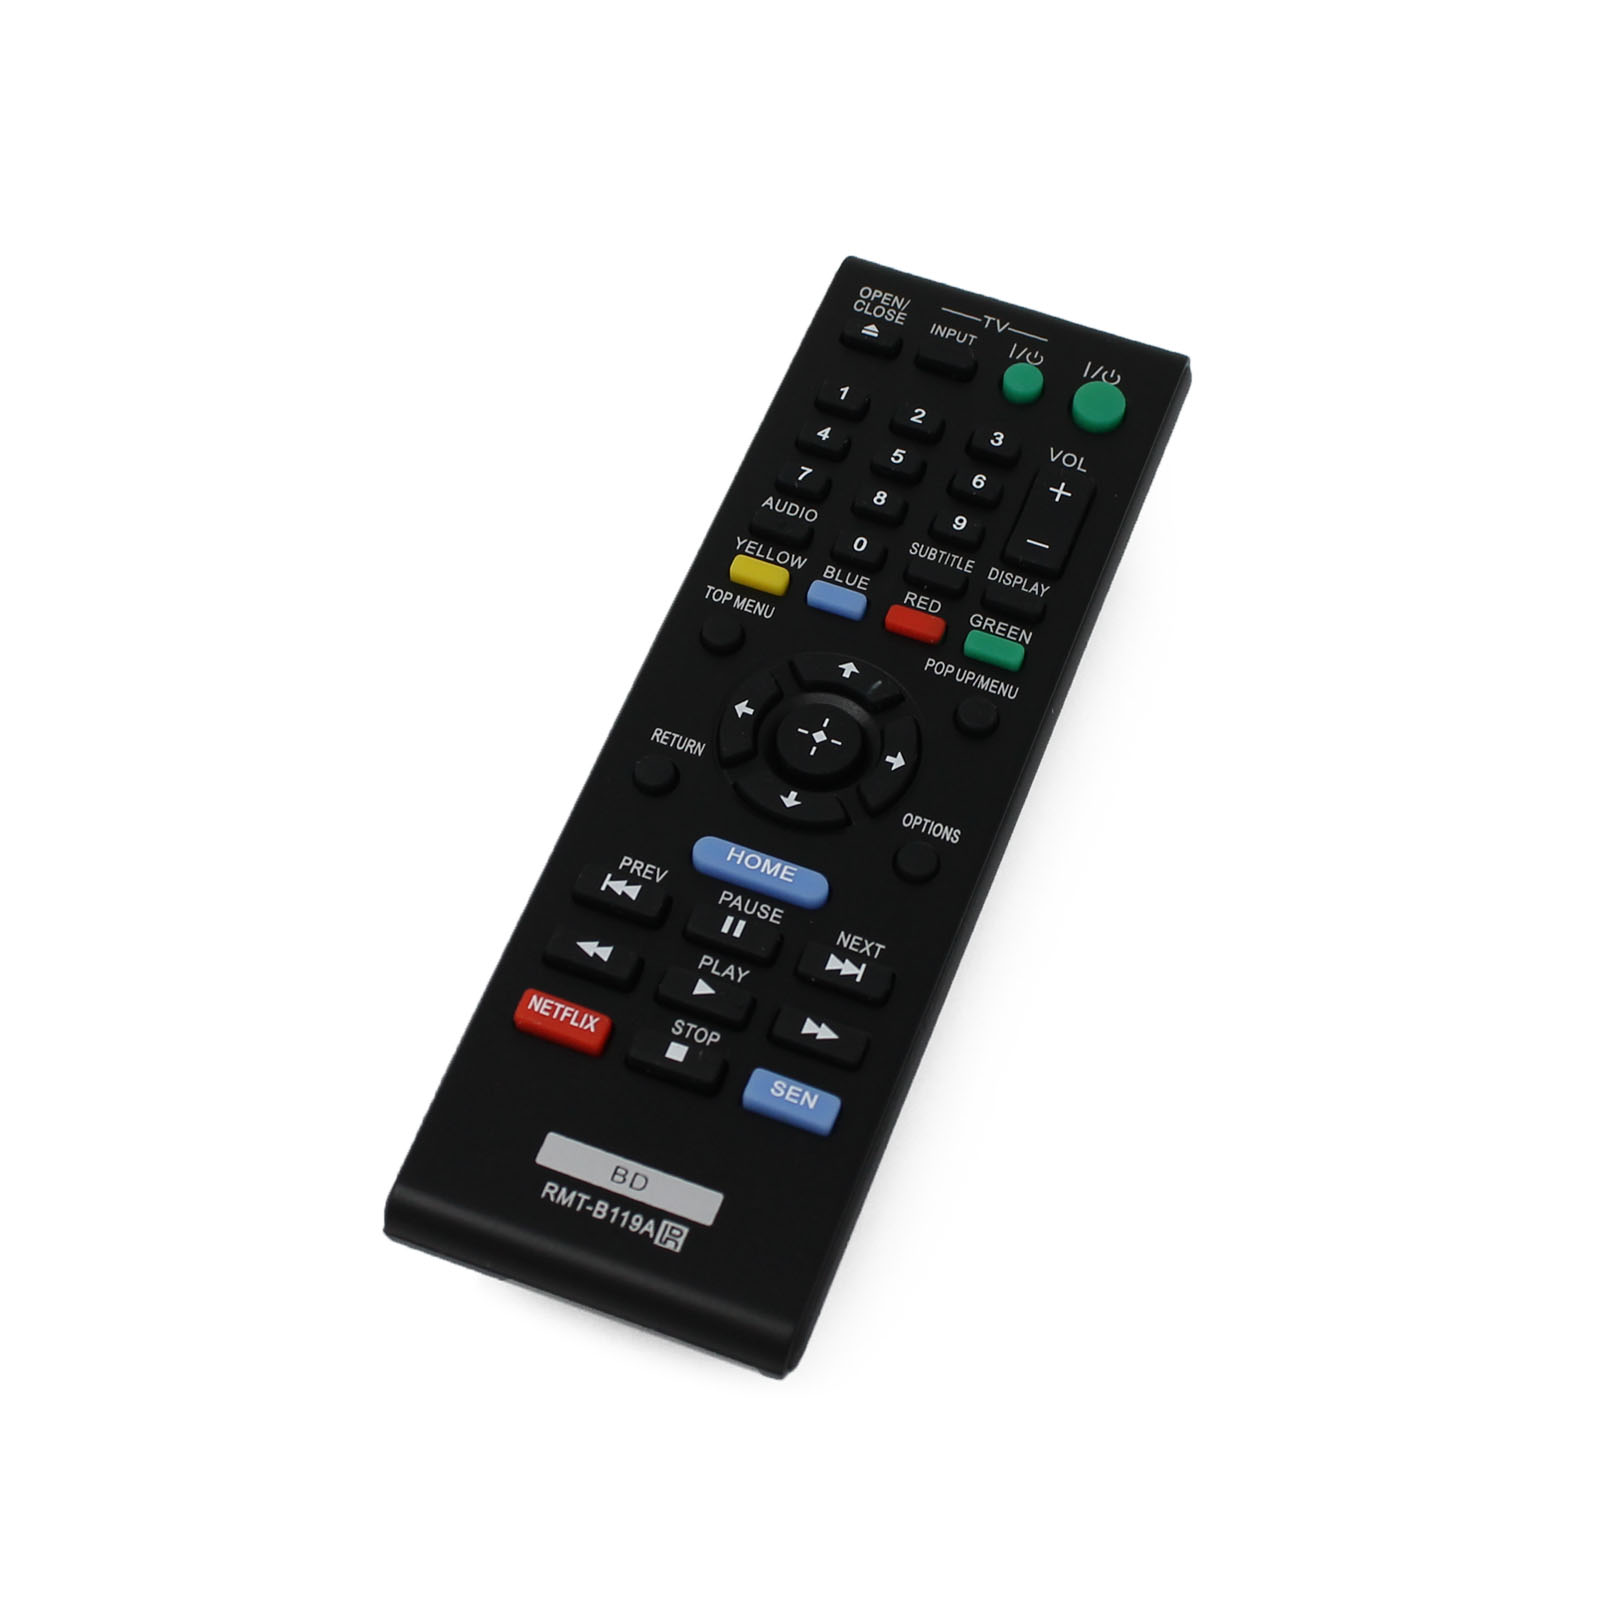 Replacement Sony RMT-B119A Blu-Ray Disc DVD Player Remote Control for Sony BDPS1100 Blu-Ray Disc DVD Player - image 4 of 4